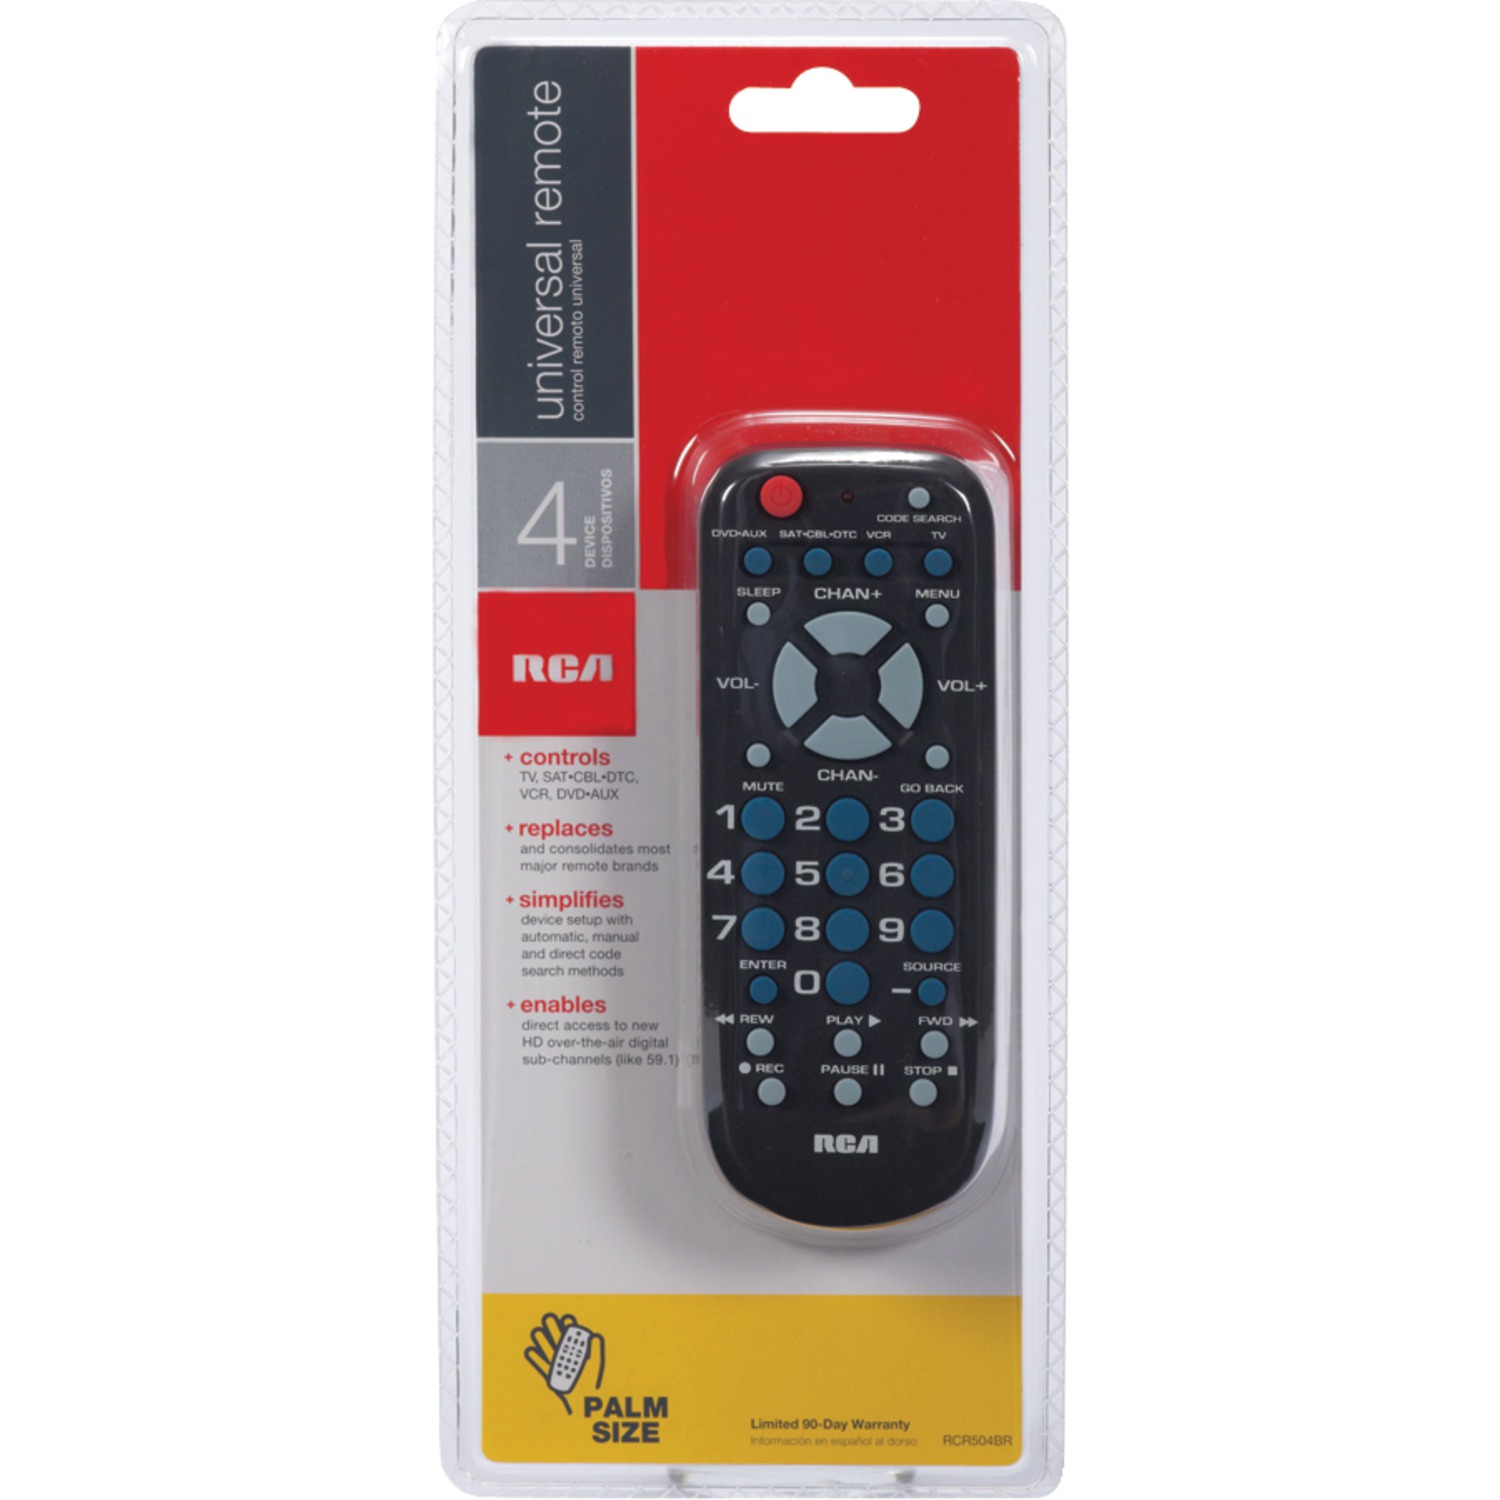 RCA Rcr504be 4-device Palm-sized Universal Remote - image 3 of 3